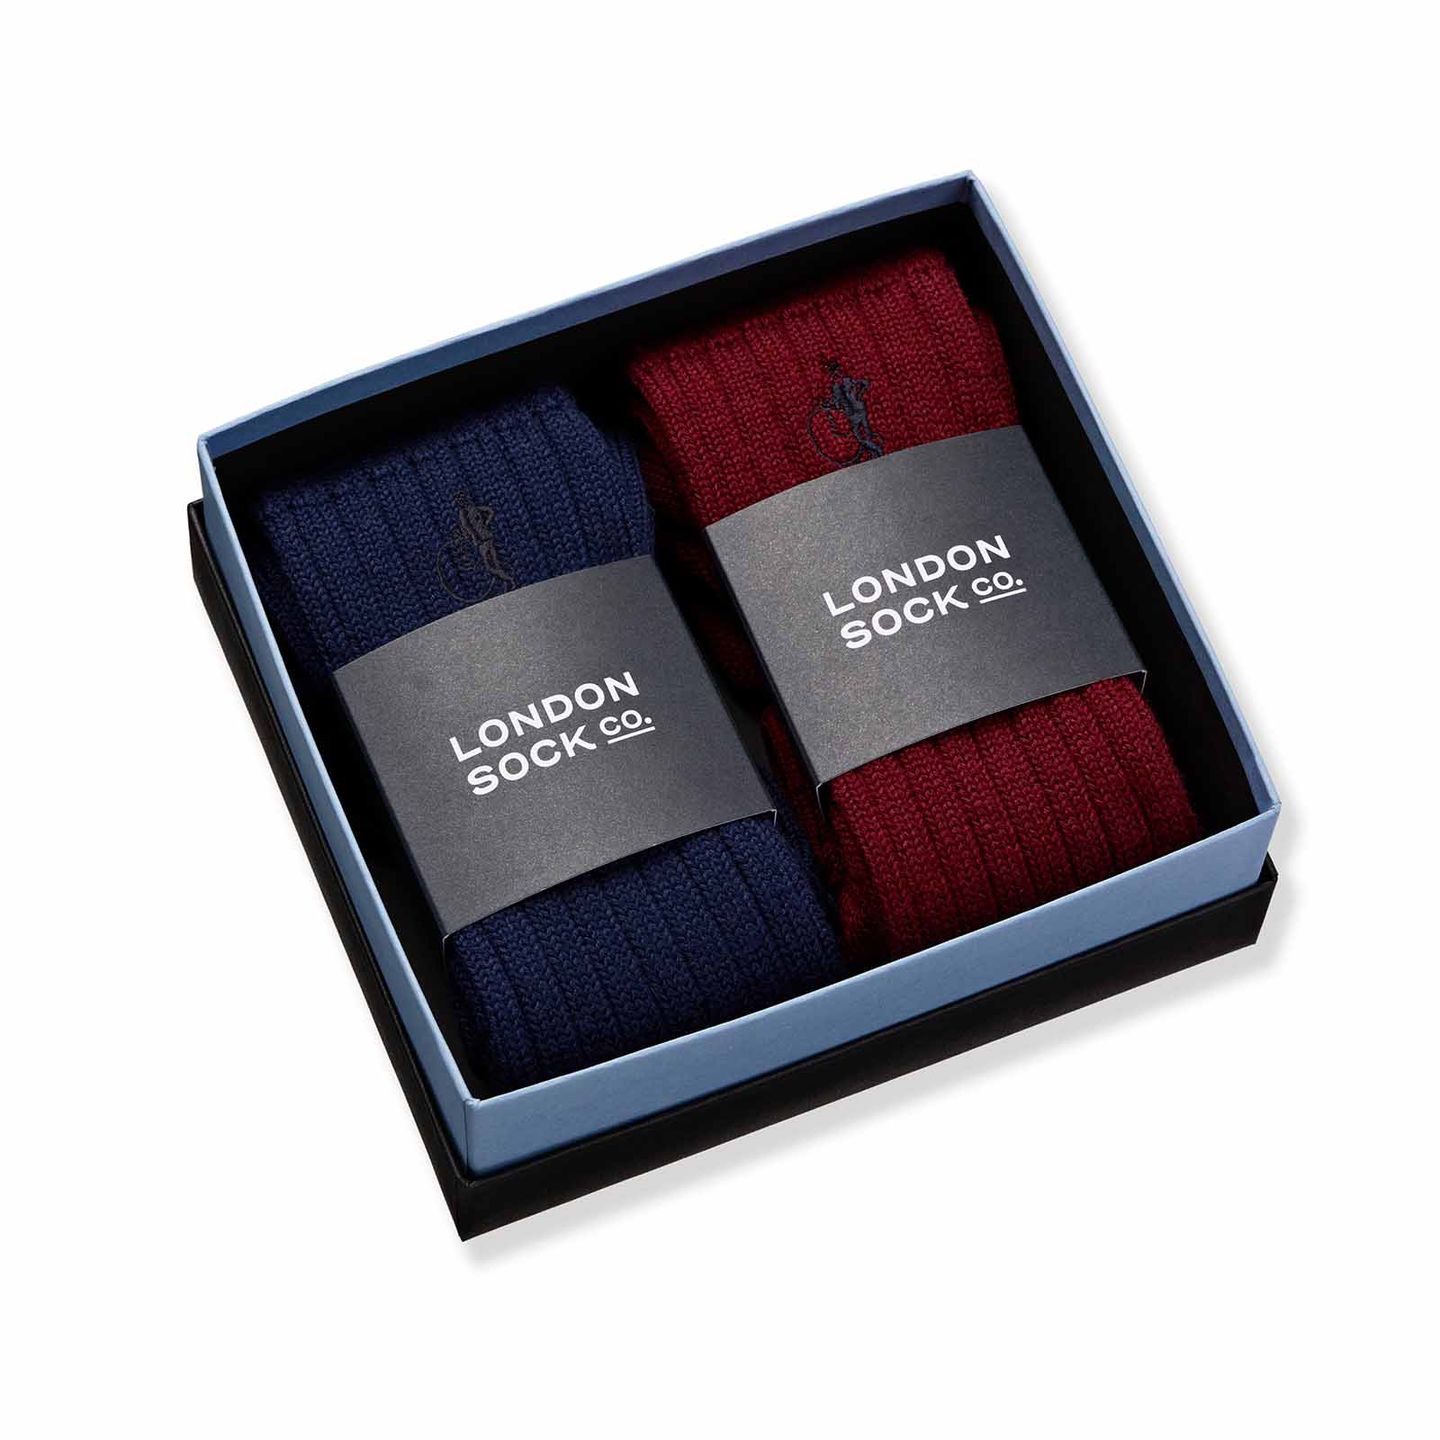 2 pair of welly boot socks in navy and ruby, with a box presentation